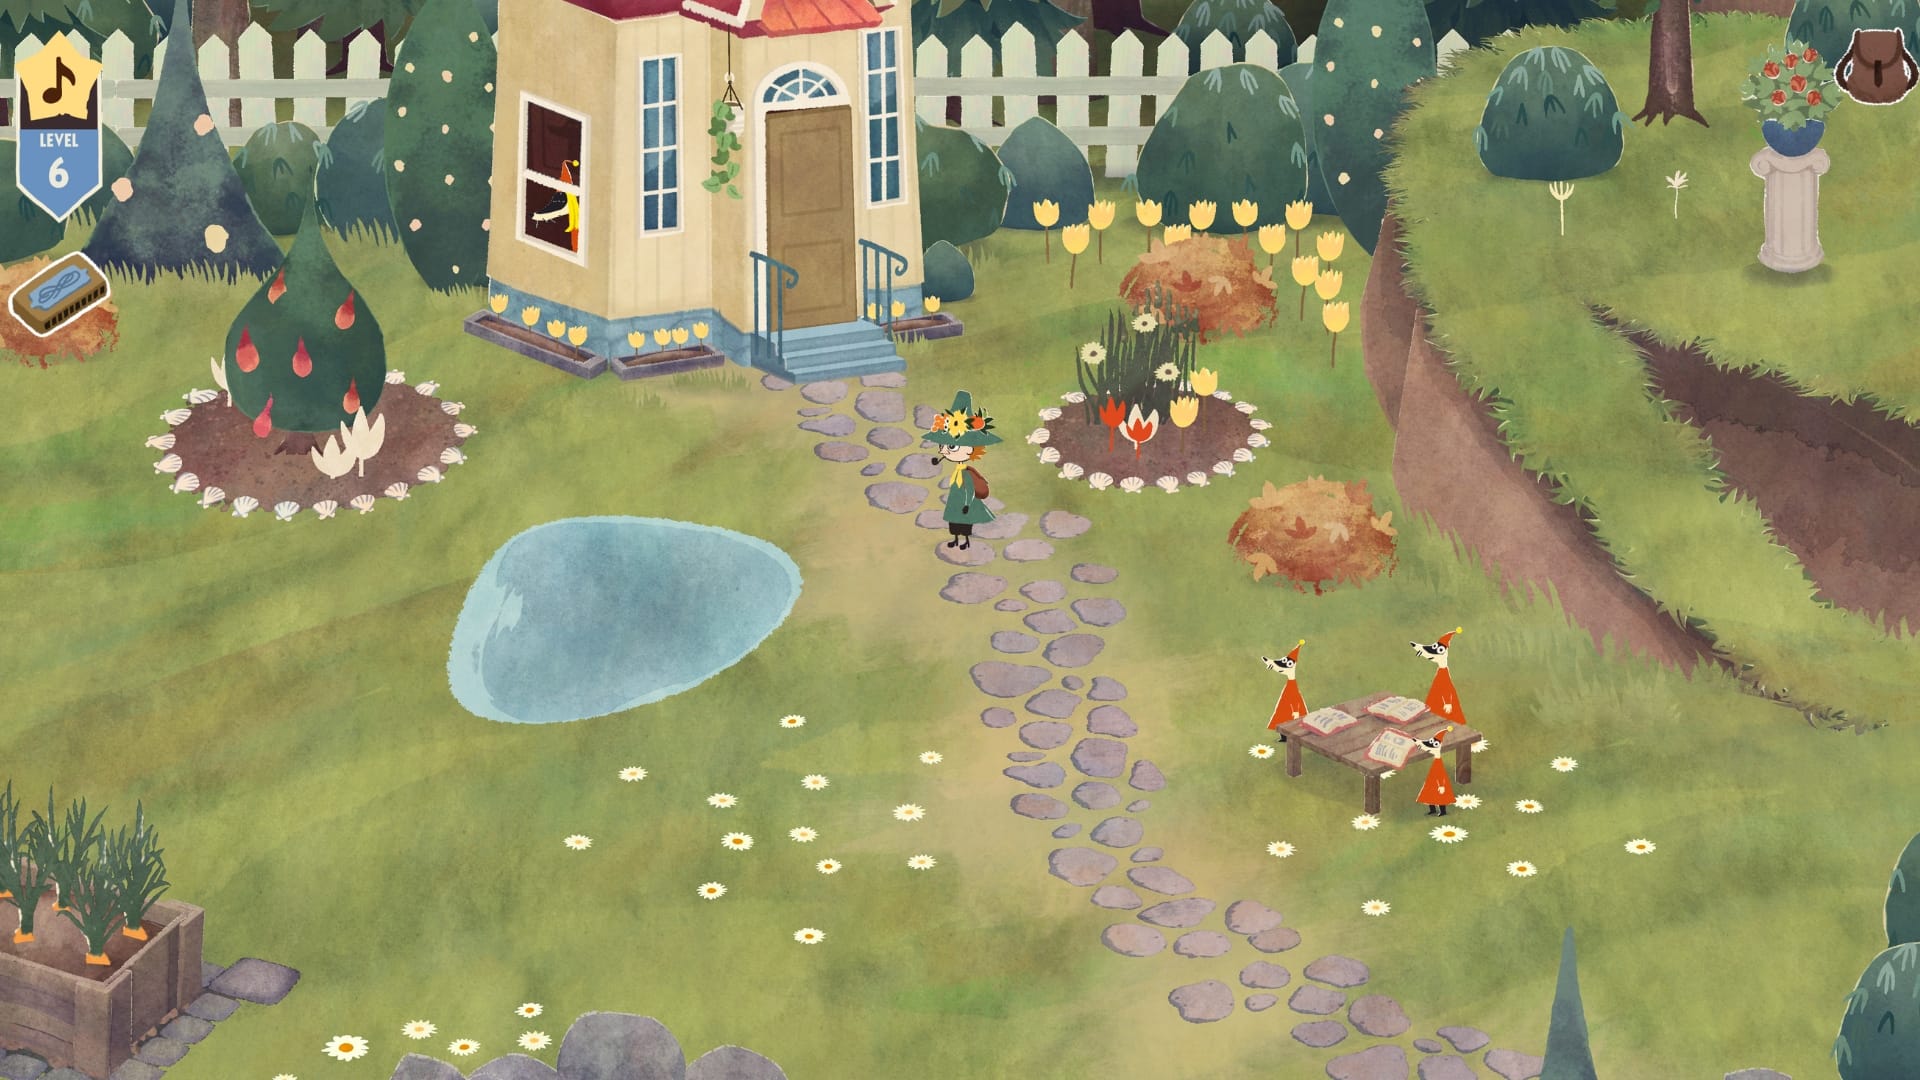 Snufkin: Melody of Moominvalley - Switch Review